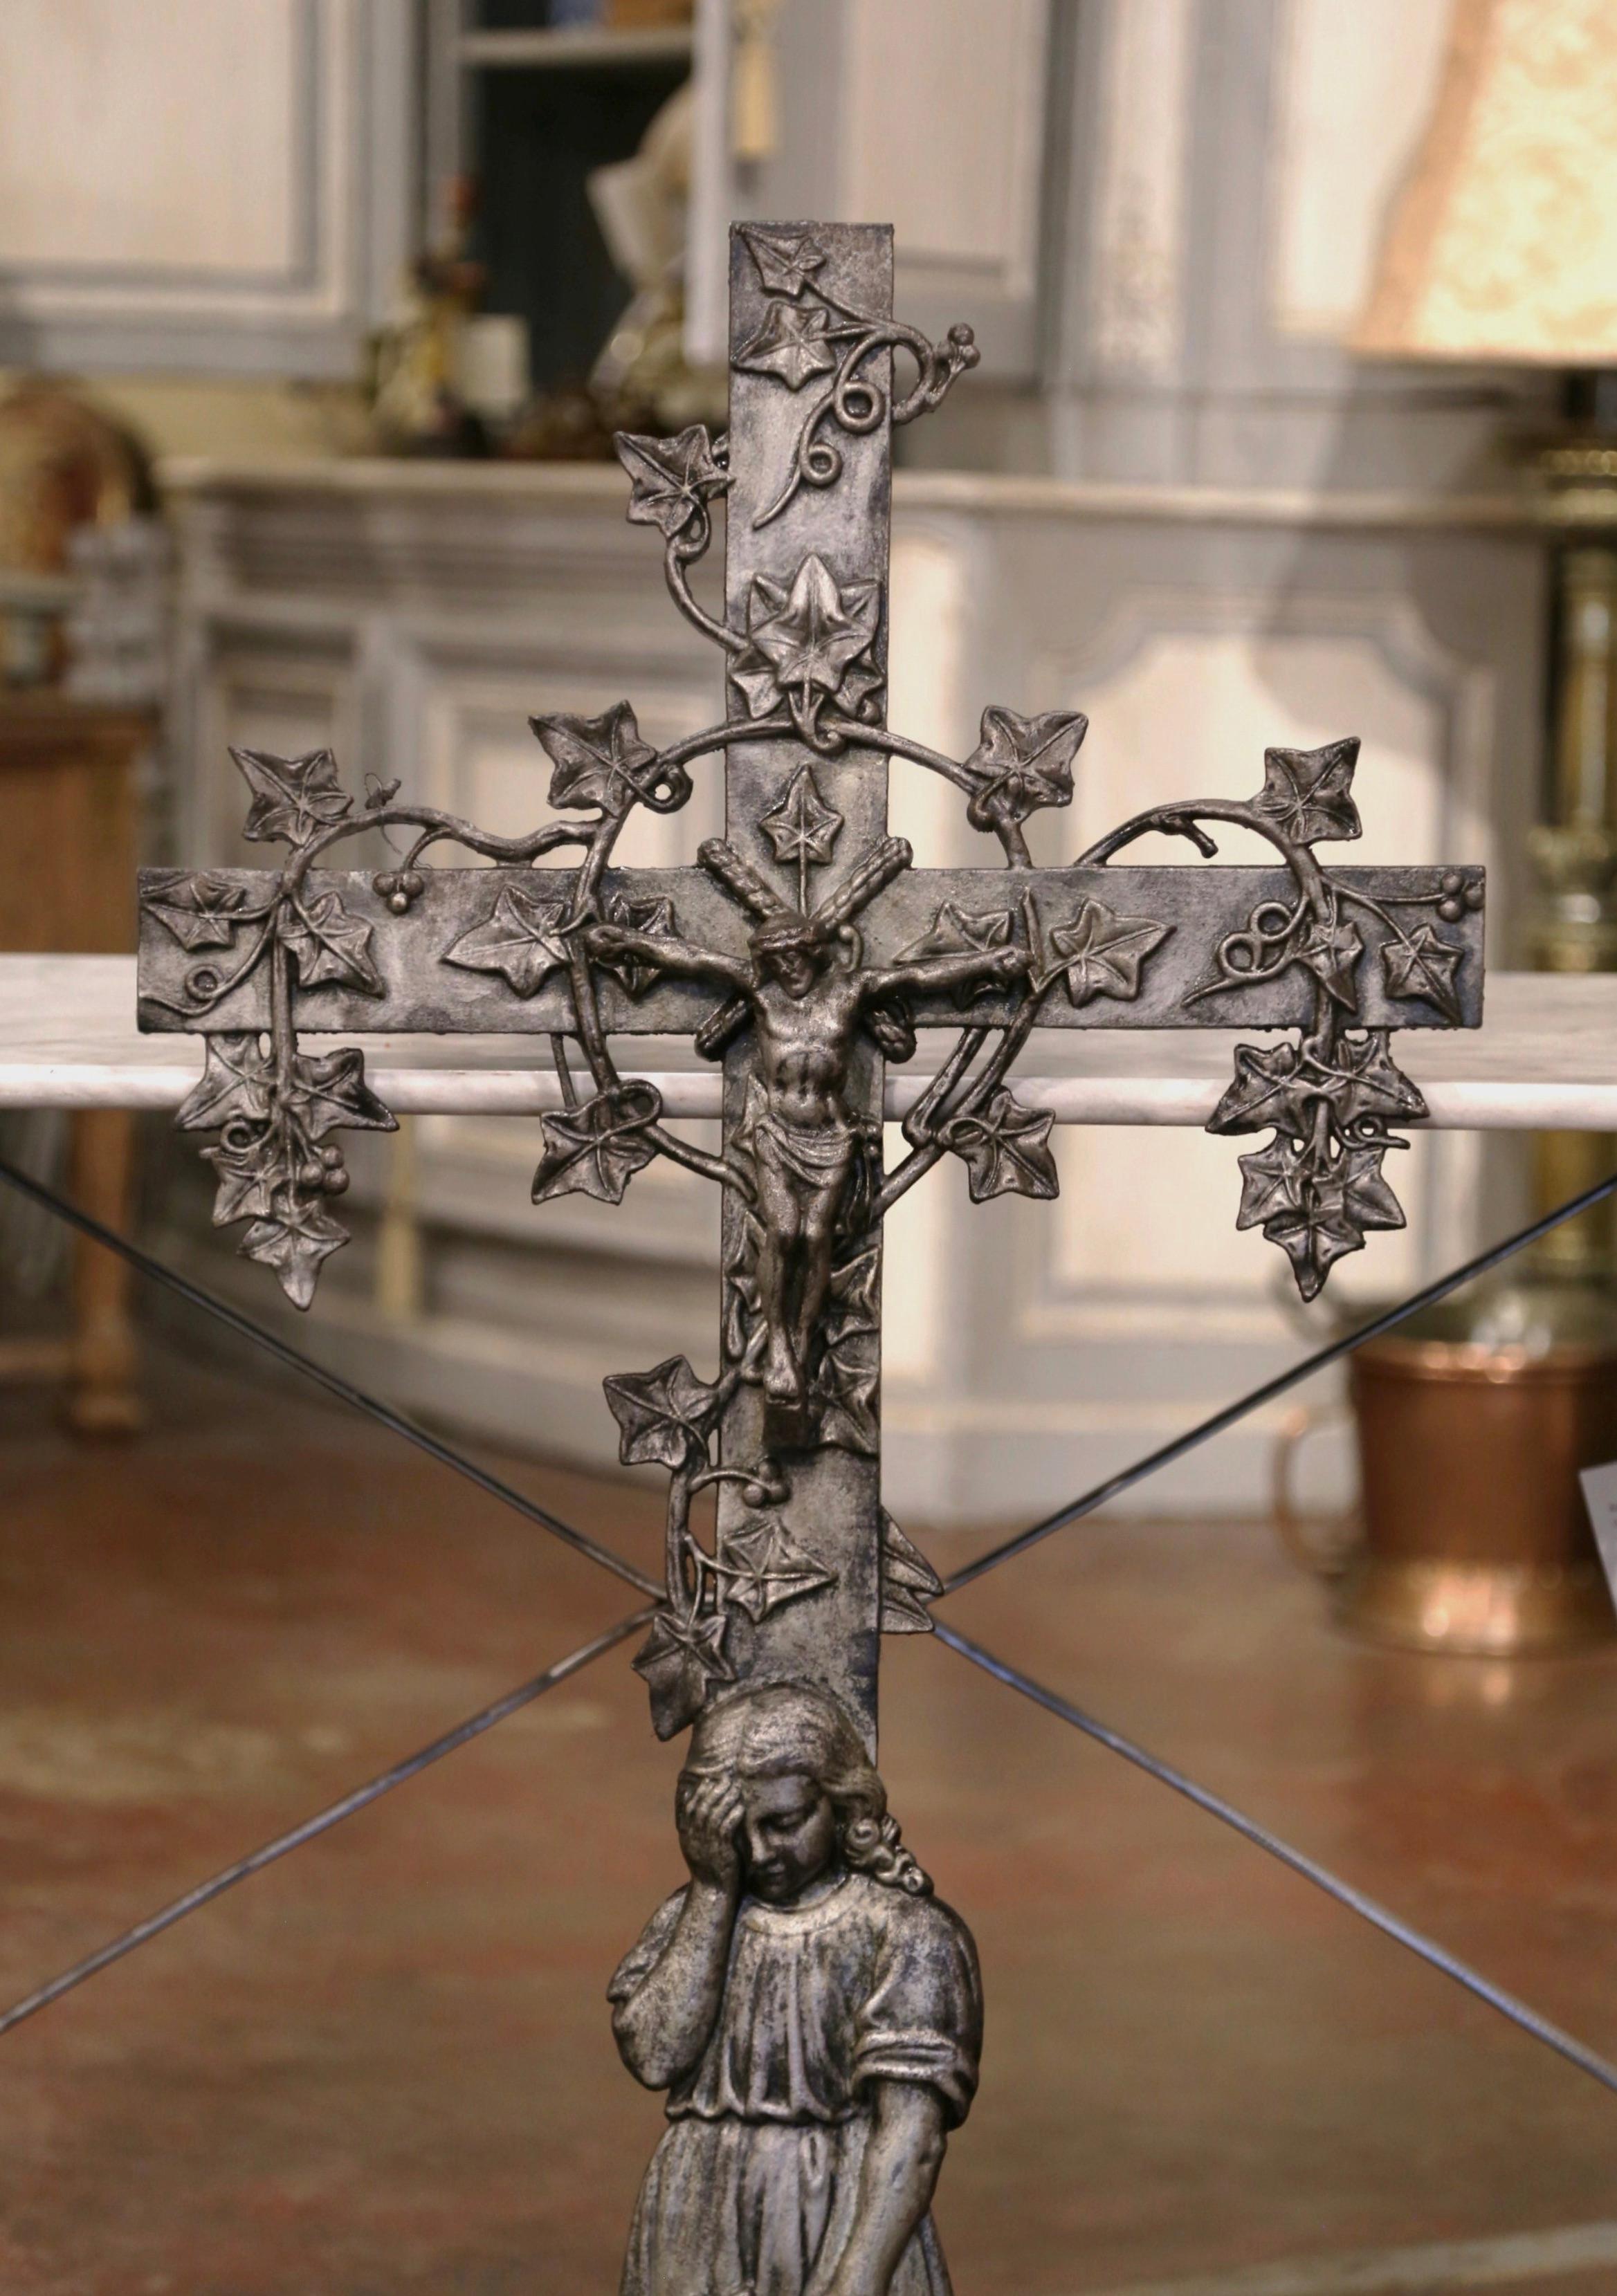 Hand-Crafted 19th Century French Iron Garden Crucifix Cross with Mourner and Vine Motifs